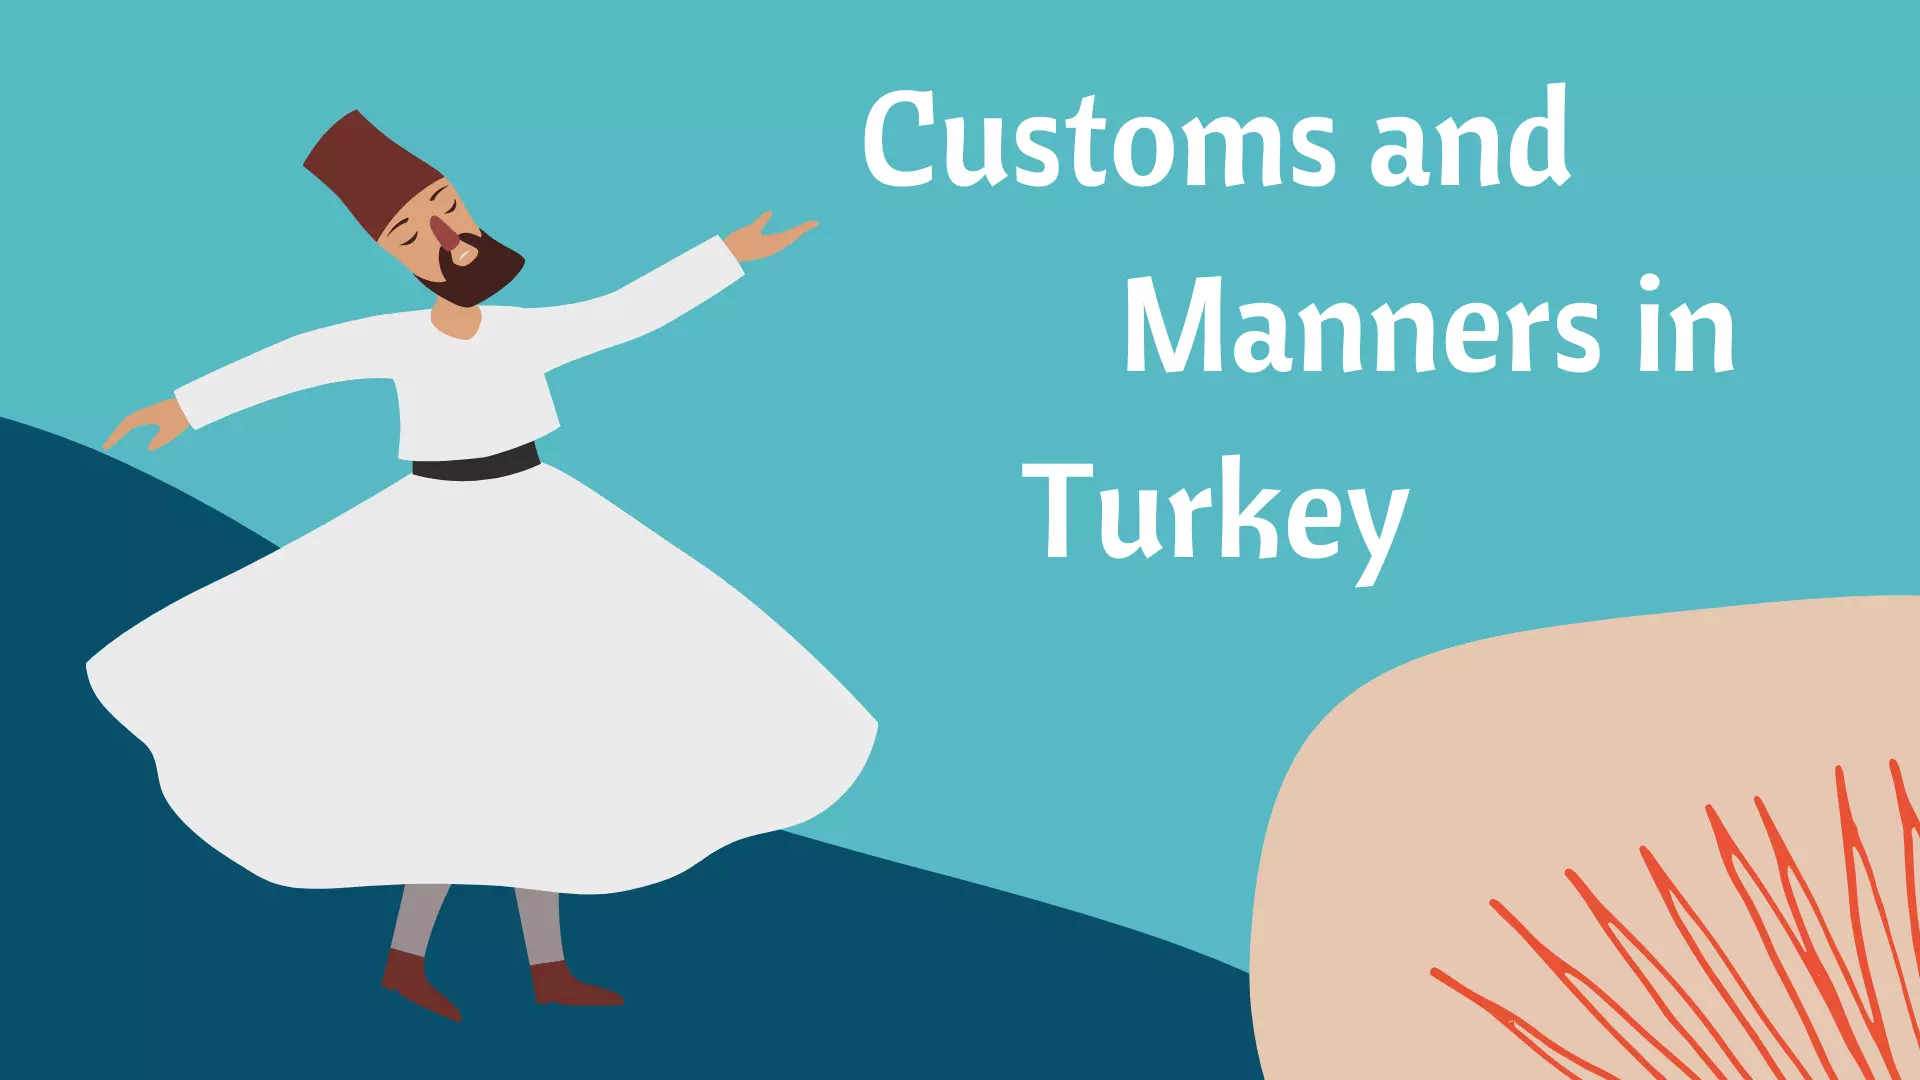 Customs and Manners in Turkey